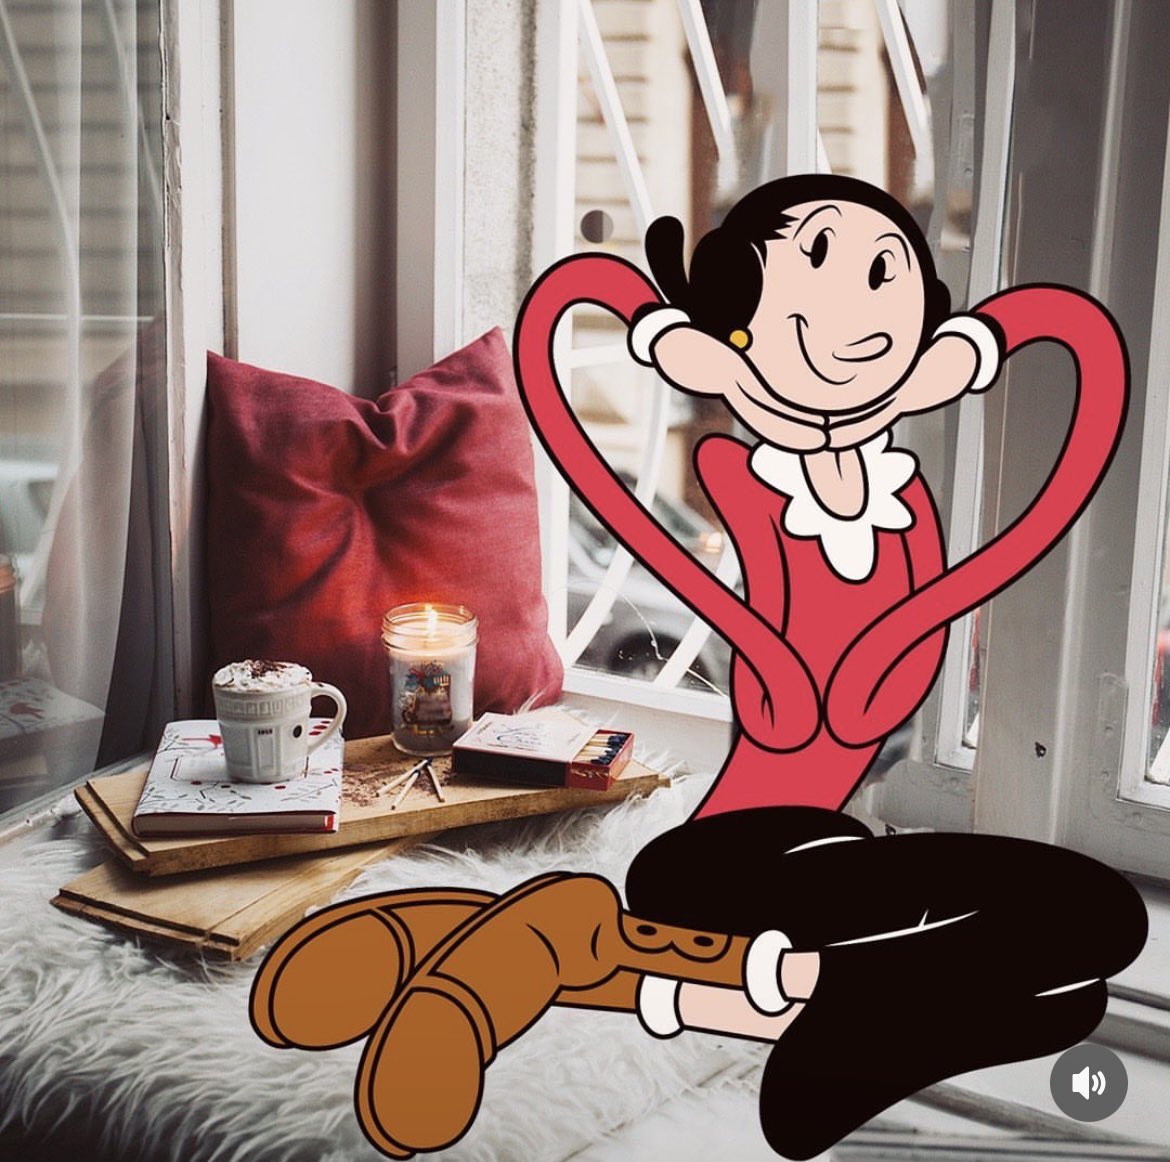 I saw this on my feed & I thought it looked familiar. A while ago, I did a big model pack of designs for an updated Olive Oyl for King Features. I drew her more classic but they wanted a “modern” look. It was a fun challenge & it’s cool to see these finally pop up in the wild. 🫒